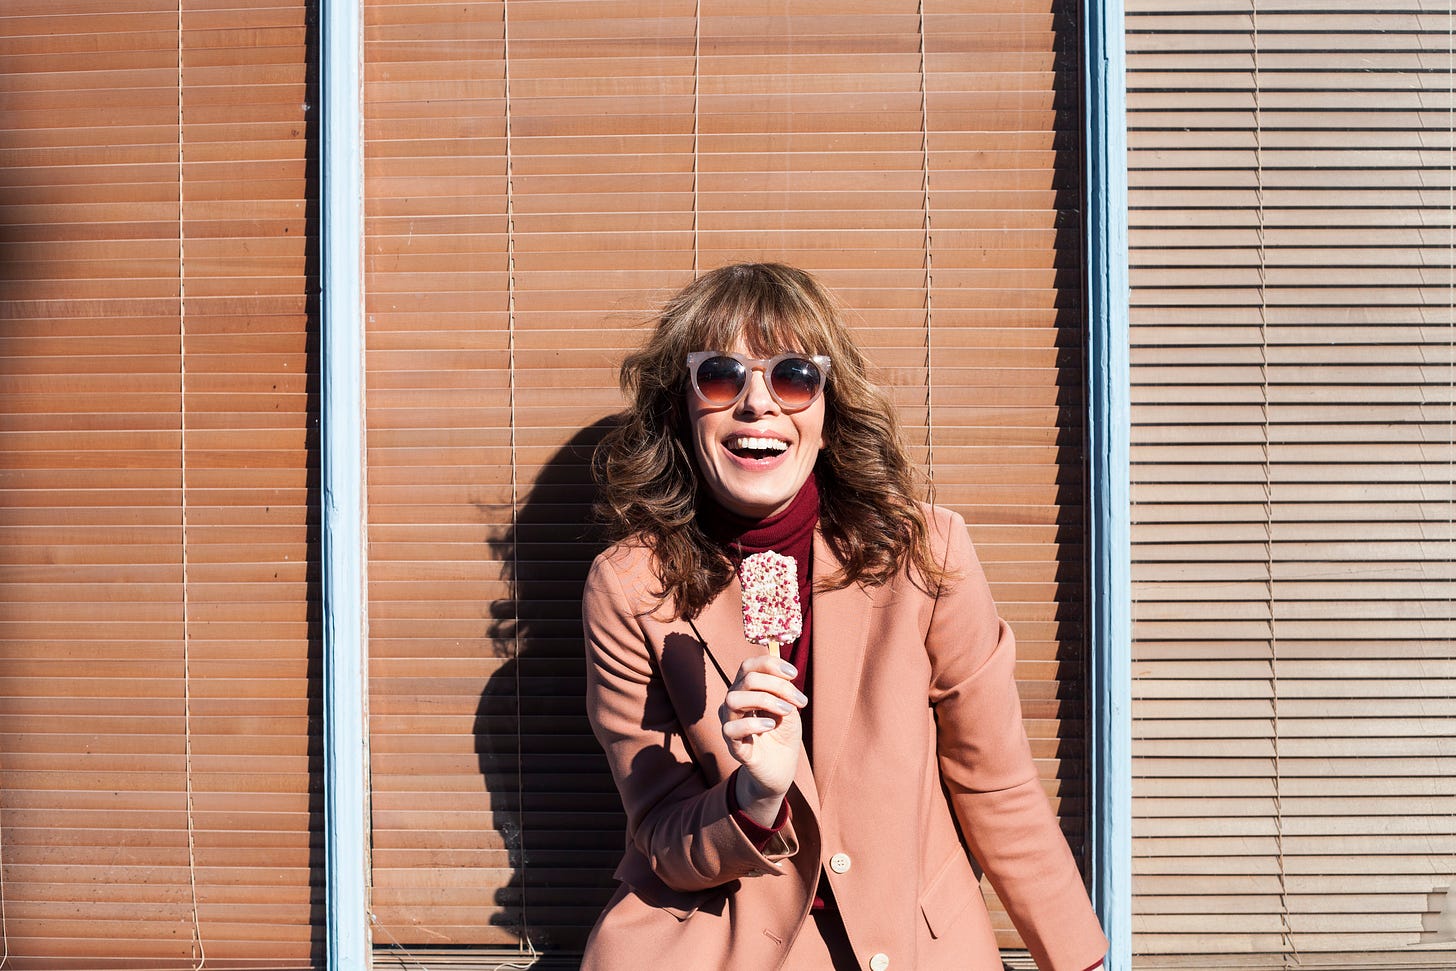 A woman with dark blonde long curly hair and bangs sits on a window sill holding an ice-cream. She is smiling and wearing pink sunglasses and a suit with a burgundy roll neck knit.